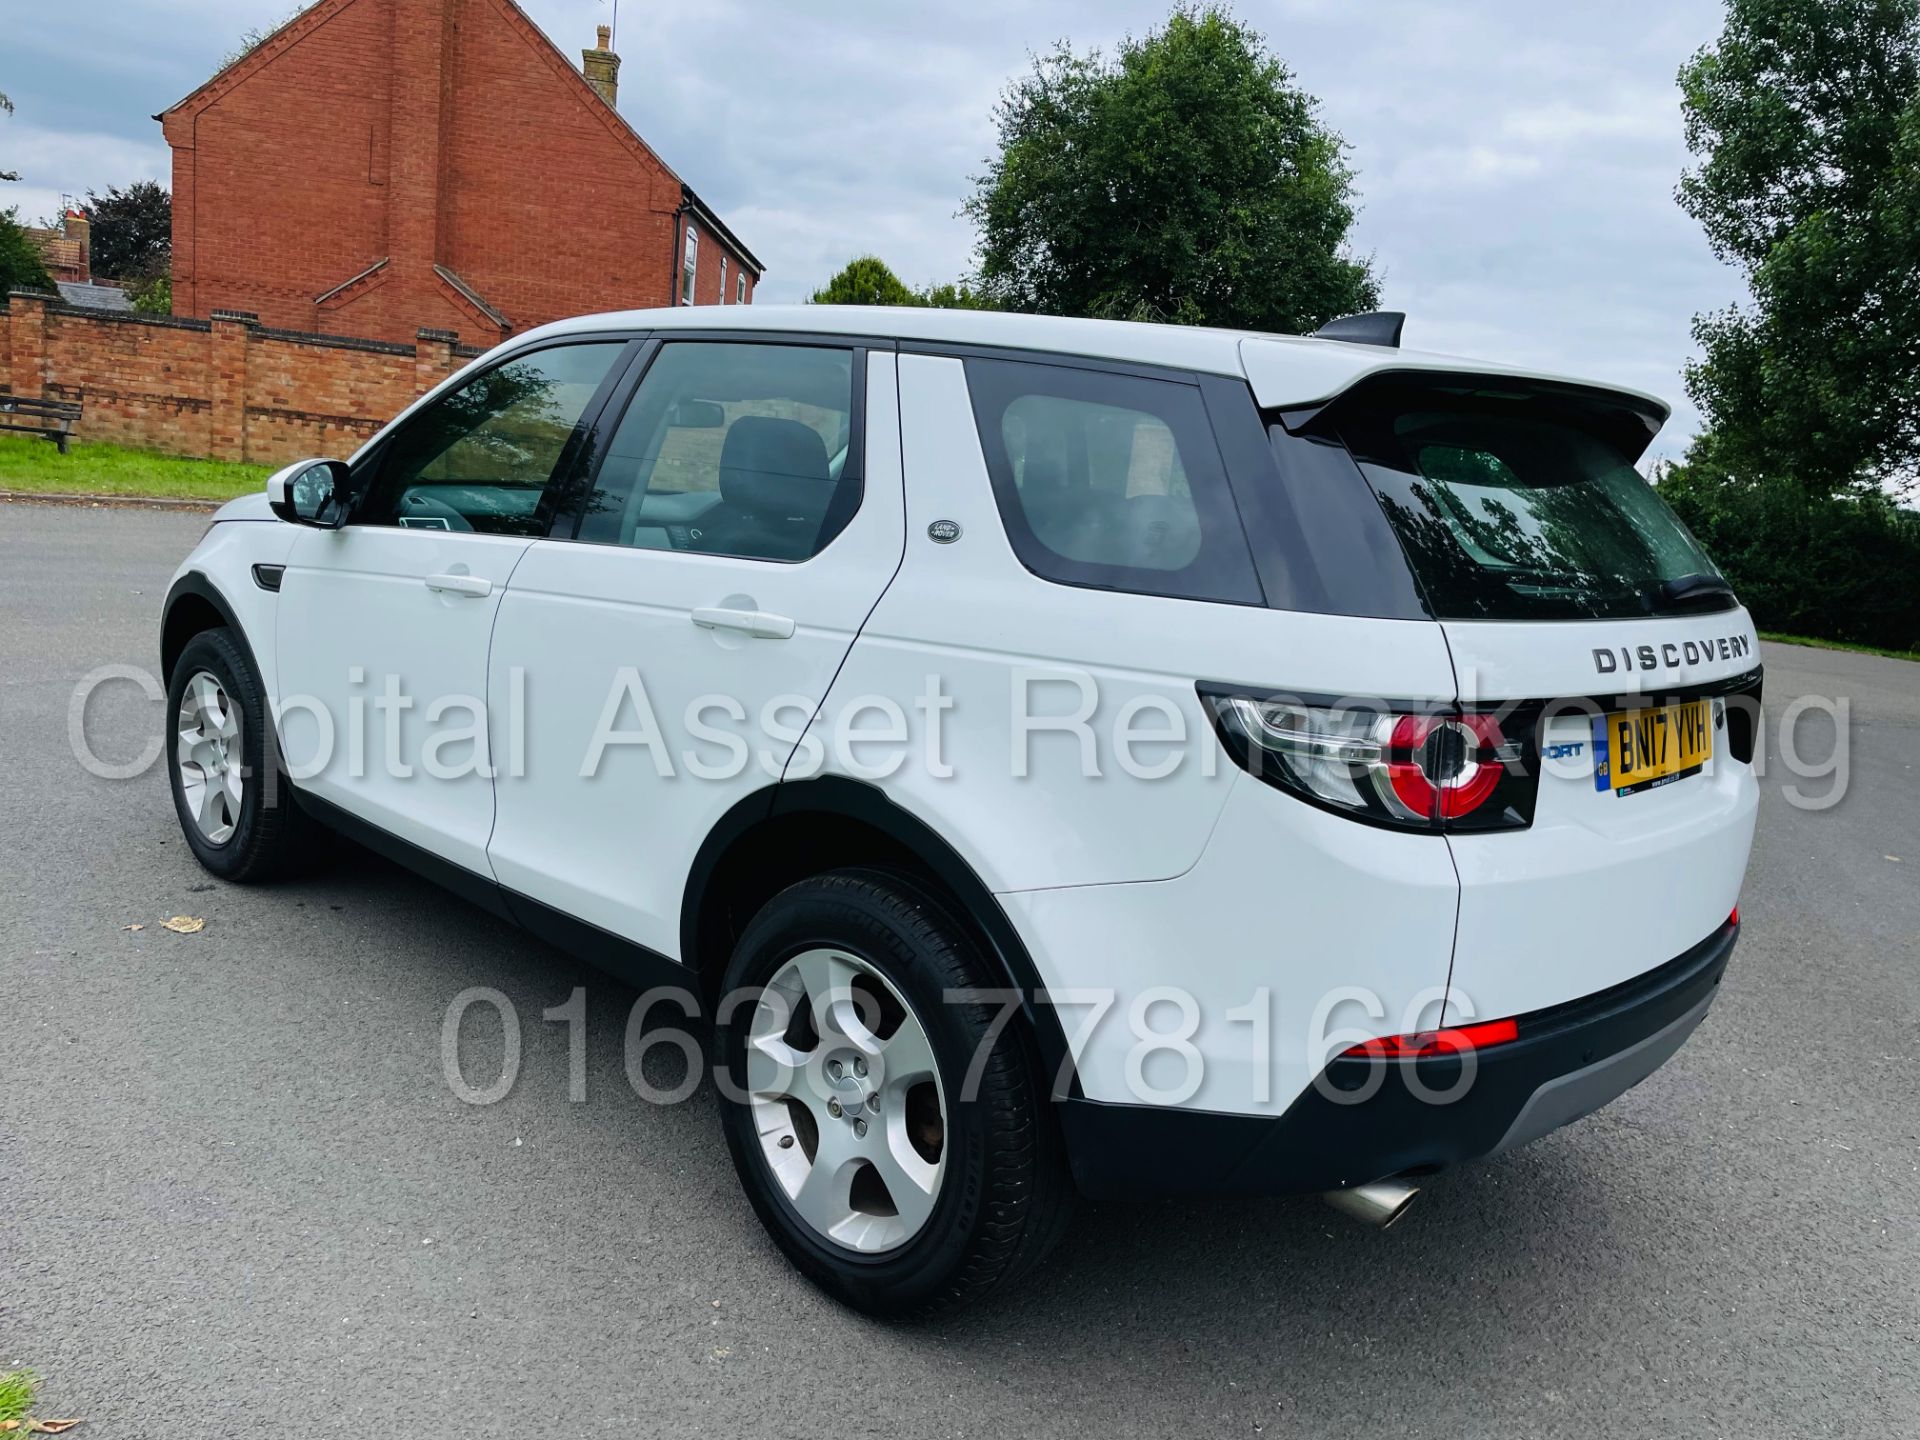 (On Sale) LAND ROVER DISCOVERY SPORT *SE TECH* SUV (2017 -EURO 6) '2.0 TD4 - STOP/START' (1 OWNER) - Image 10 of 52